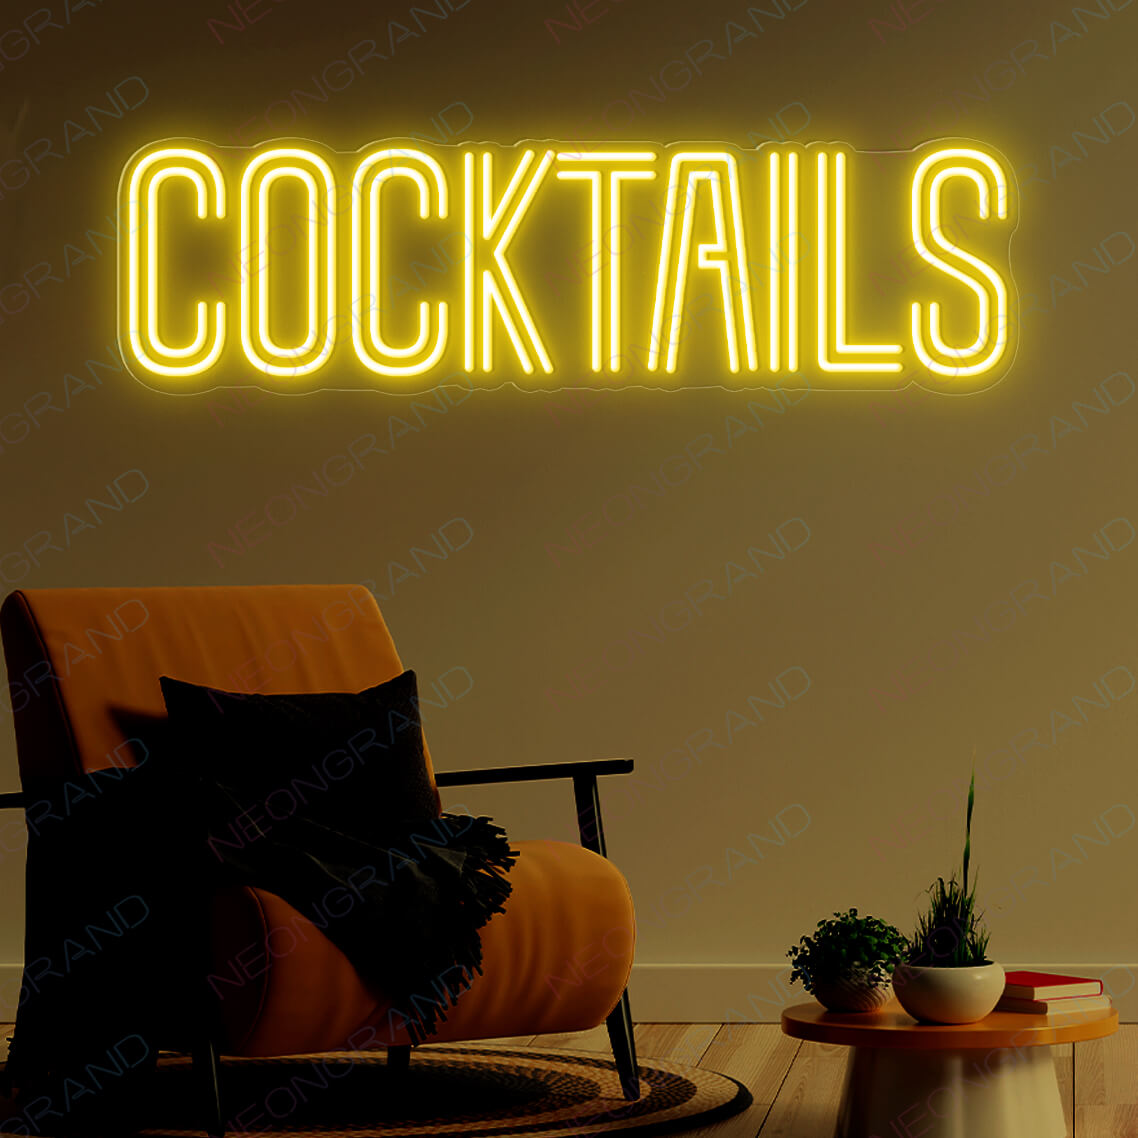 Cocktails Neon Sign Bar Led Light yellow